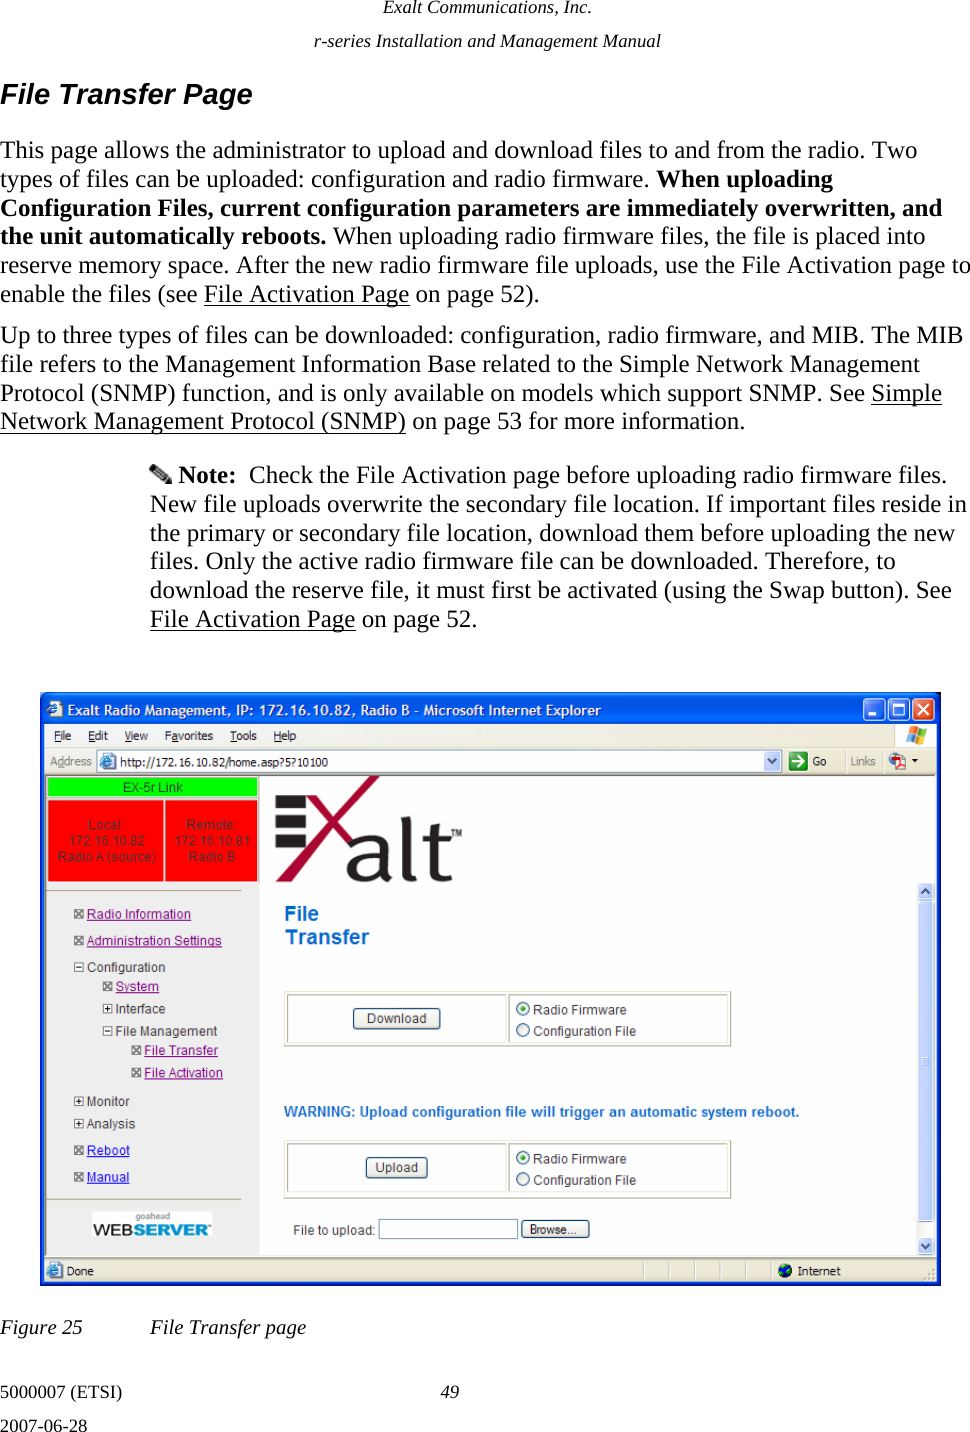 Exalt Communications, Inc. r-series Installation and Management Manual 5000007 (ETSI)  49 2007-06-28  File Transfer Page This page allows the administrator to upload and download files to and from the radio. Two types of files can be uploaded: configuration and radio firmware. When uploading Configuration Files, current configuration parameters are immediately overwritten, and the unit automatically reboots. When uploading radio firmware files, the file is placed into reserve memory space. After the new radio firmware file uploads, use the File Activation page to enable the files (see File Activation Page on page 52). Up to three types of files can be downloaded: configuration, radio firmware, and MIB. The MIB file refers to the Management Information Base related to the Simple Network Management Protocol (SNMP) function, and is only available on models which support SNMP. See Simple Network Management Protocol (SNMP) on page 53 for more information.  Note:  Check the File Activation page before uploading radio firmware files. New file uploads overwrite the secondary file location. If important files reside in the primary or secondary file location, download them before uploading the new files. Only the active radio firmware file can be downloaded. Therefore, to download the reserve file, it must first be activated (using the Swap button). See File Activation Page on page 52. Figure 25  File Transfer page 